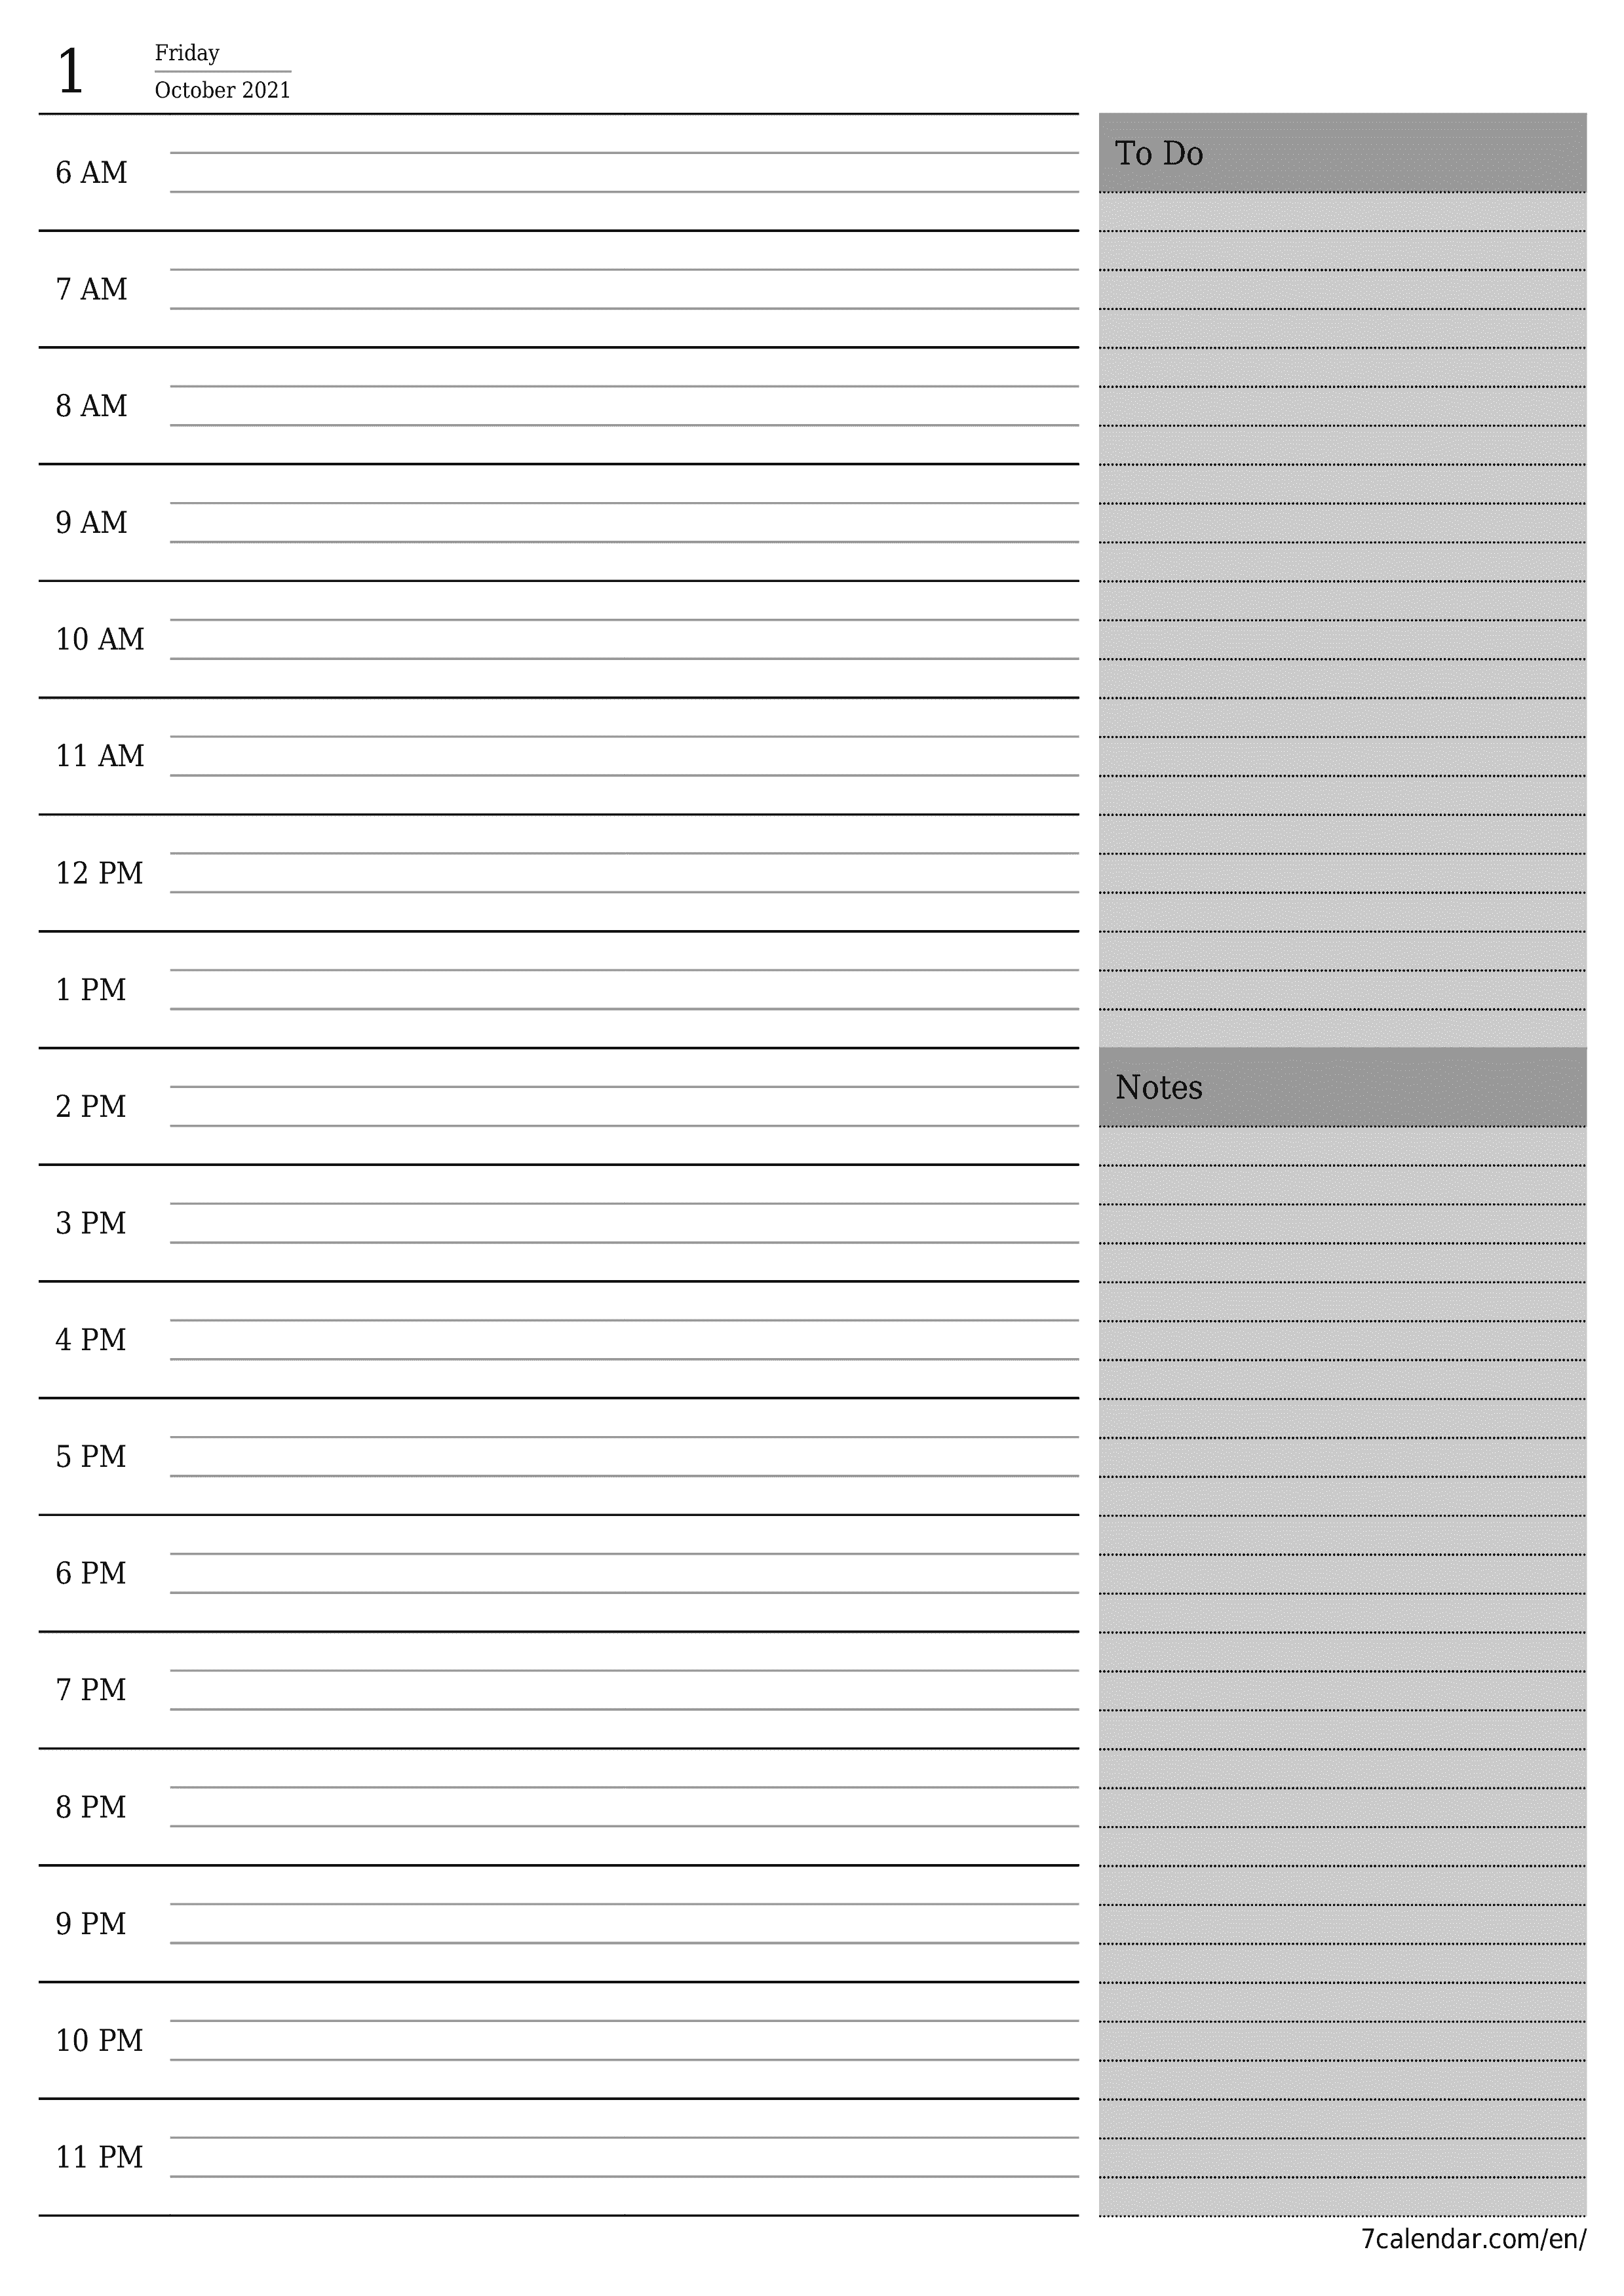 Blank daily printable calendar and planner for day October 2021 with notes, save and print to PDF PNG English - 7calendar.com